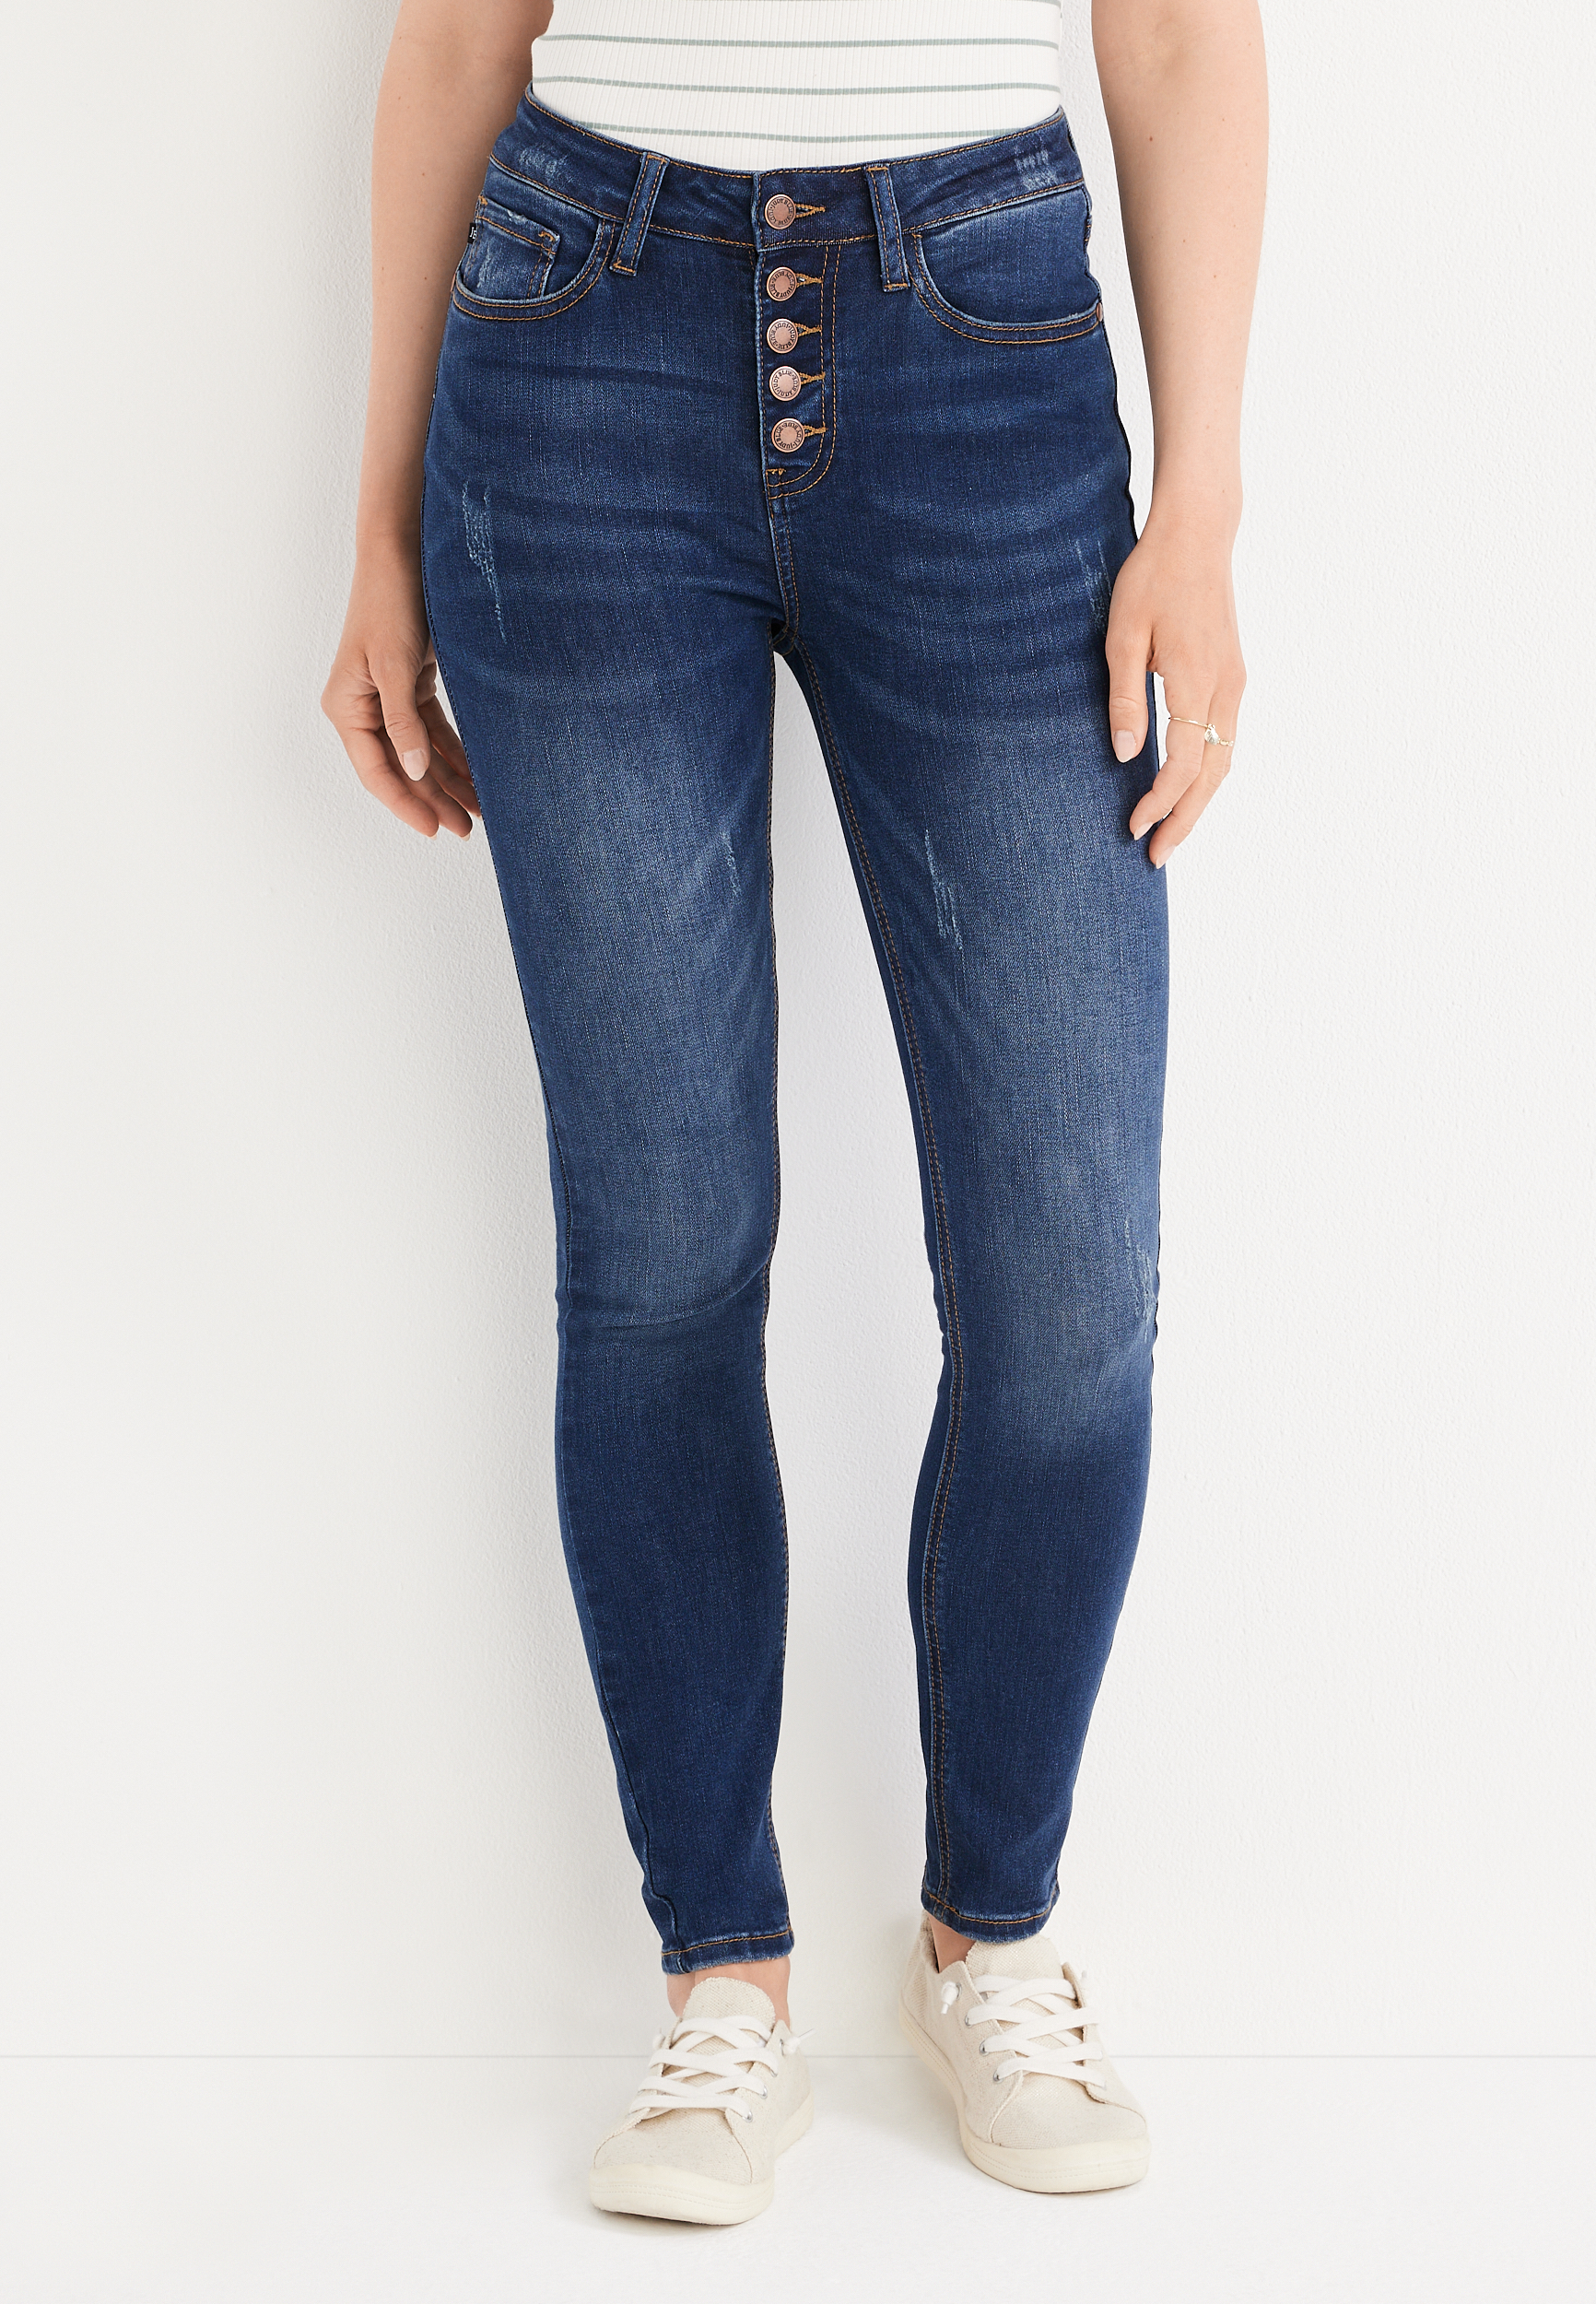 Judy Blue Jeans  Plus Size Maddison High Rise Button Fly Skinny JB88233-PL  – American Blues